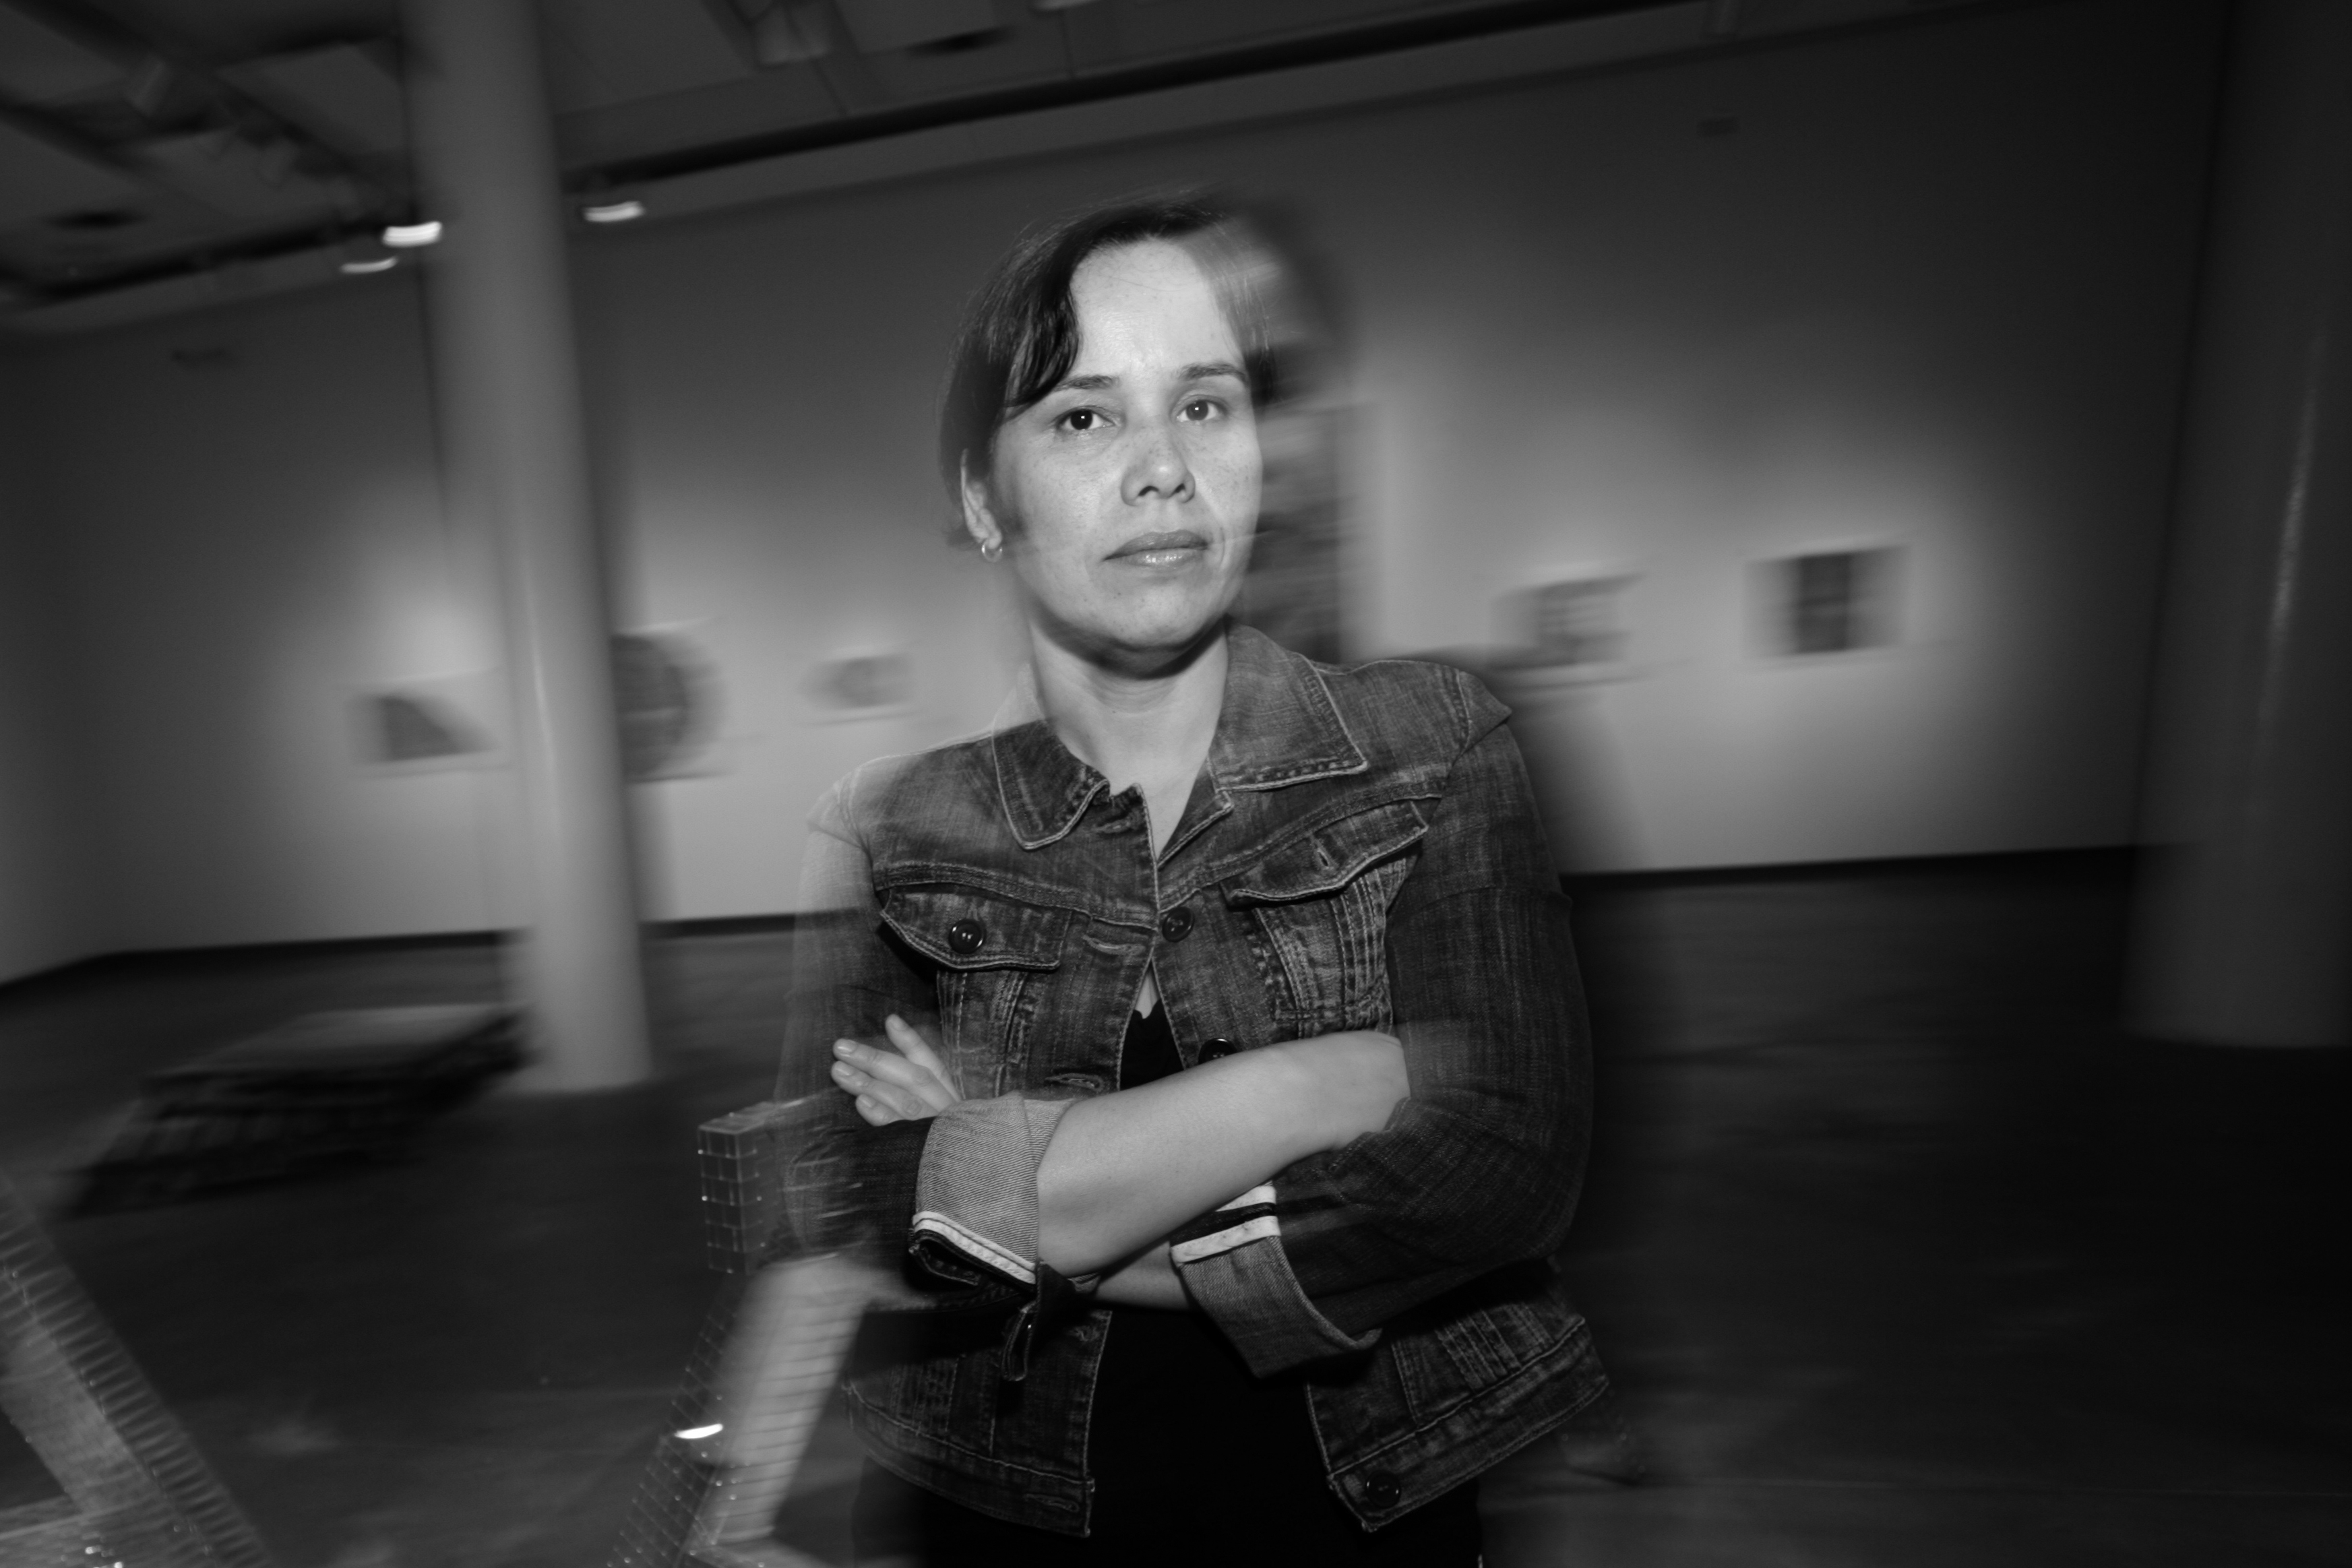 Somewhat blurry black and white portrait of Yumi Janairo Roth. She is wearing a jean jacket, a printed skirt, and has her arms crossed. She has a serious yet soft look on her face and is standing indoors in an unidentified space.